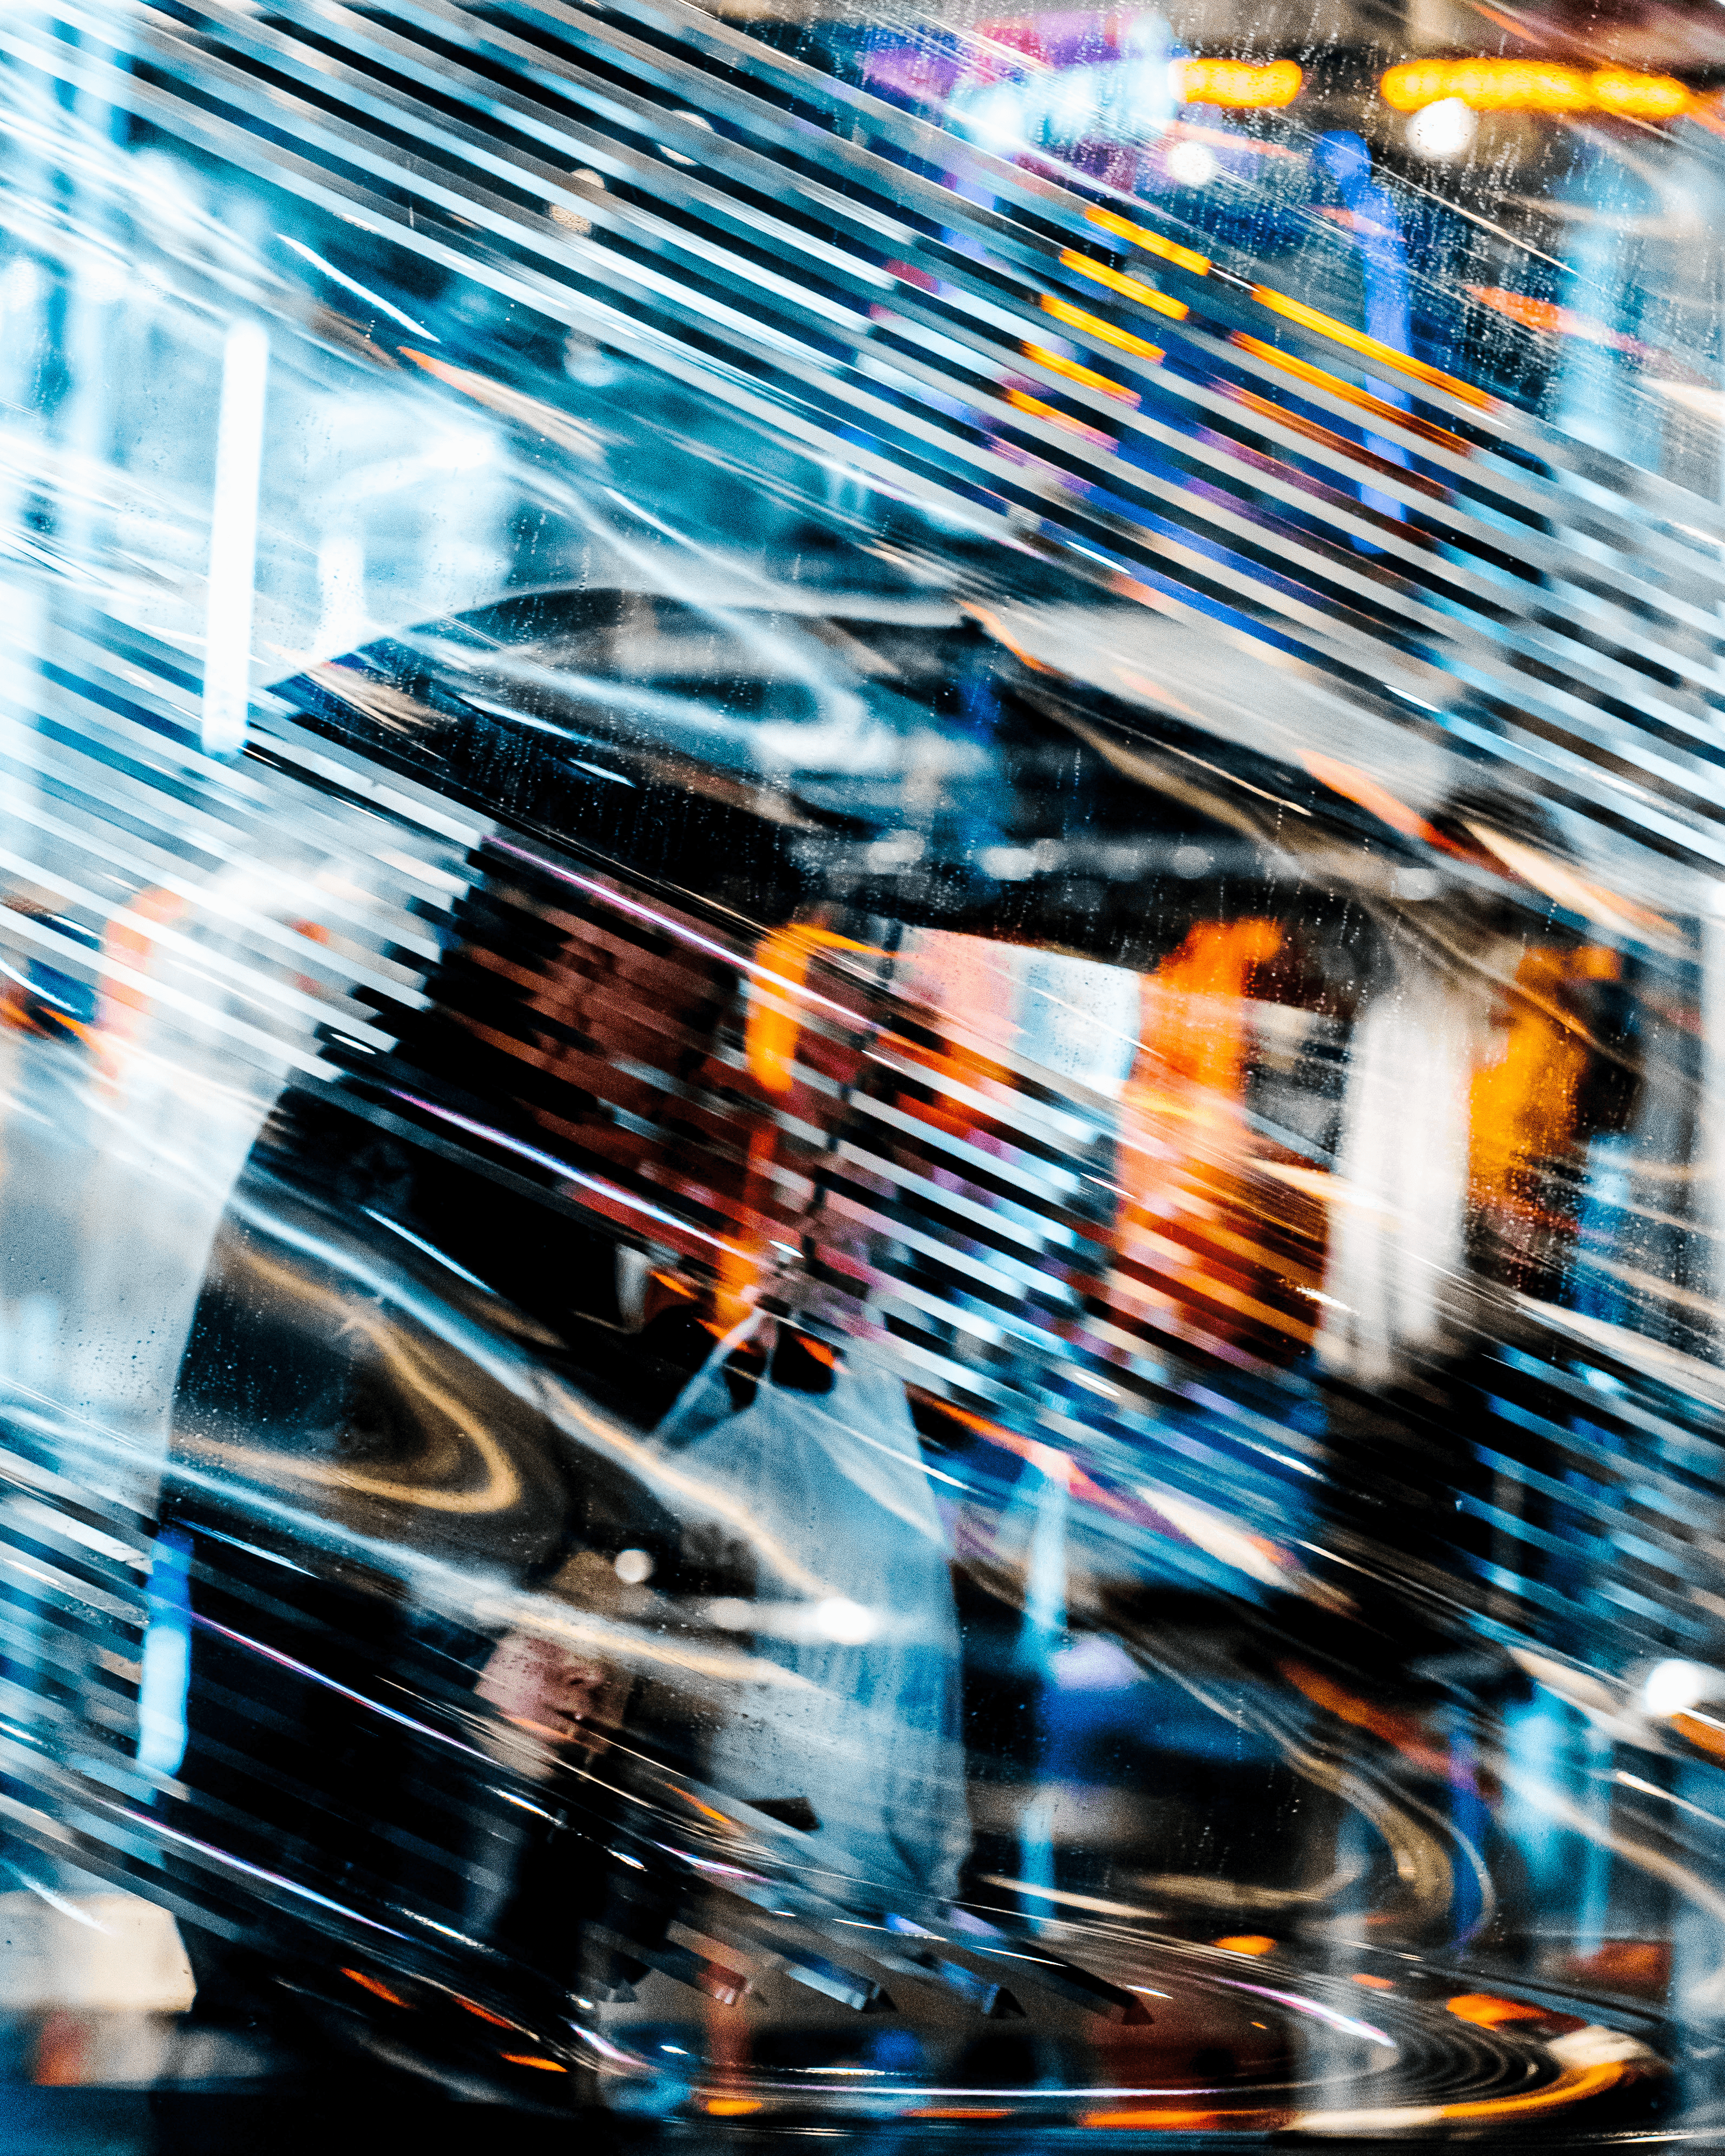 Cyber Streets #51. Abstraction